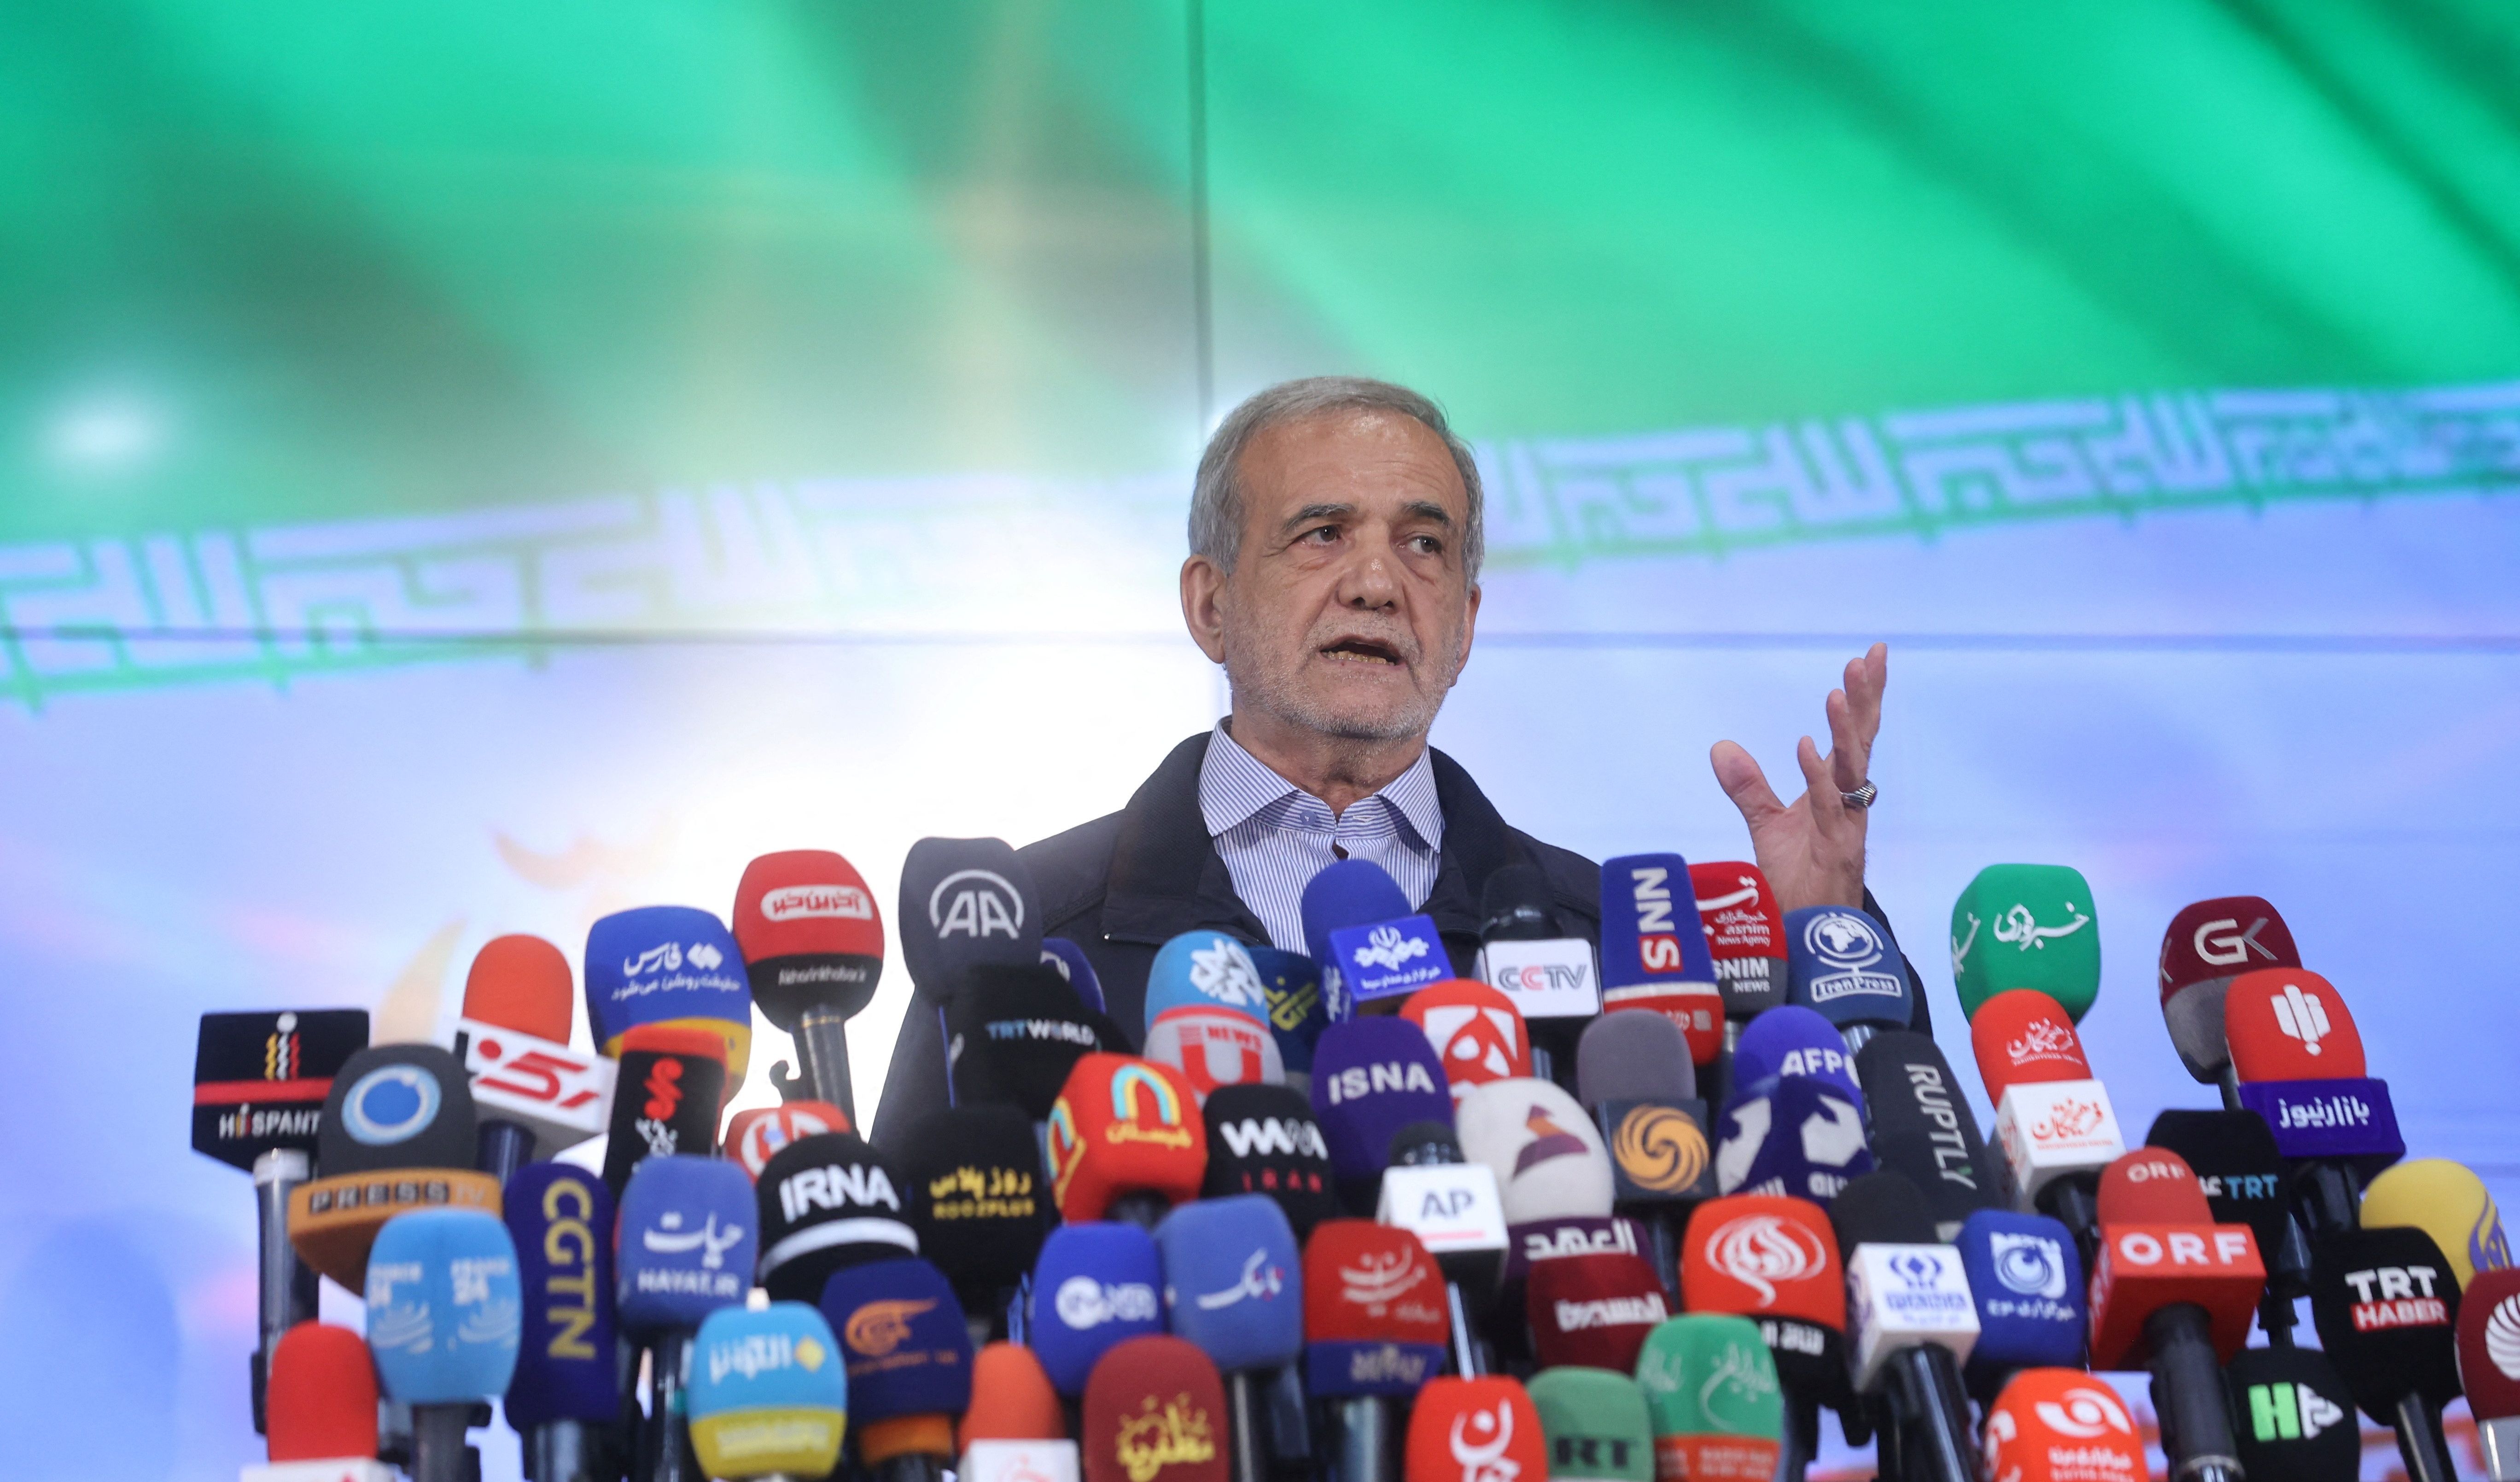 Could a reformist actually win the Iranian presidential election?